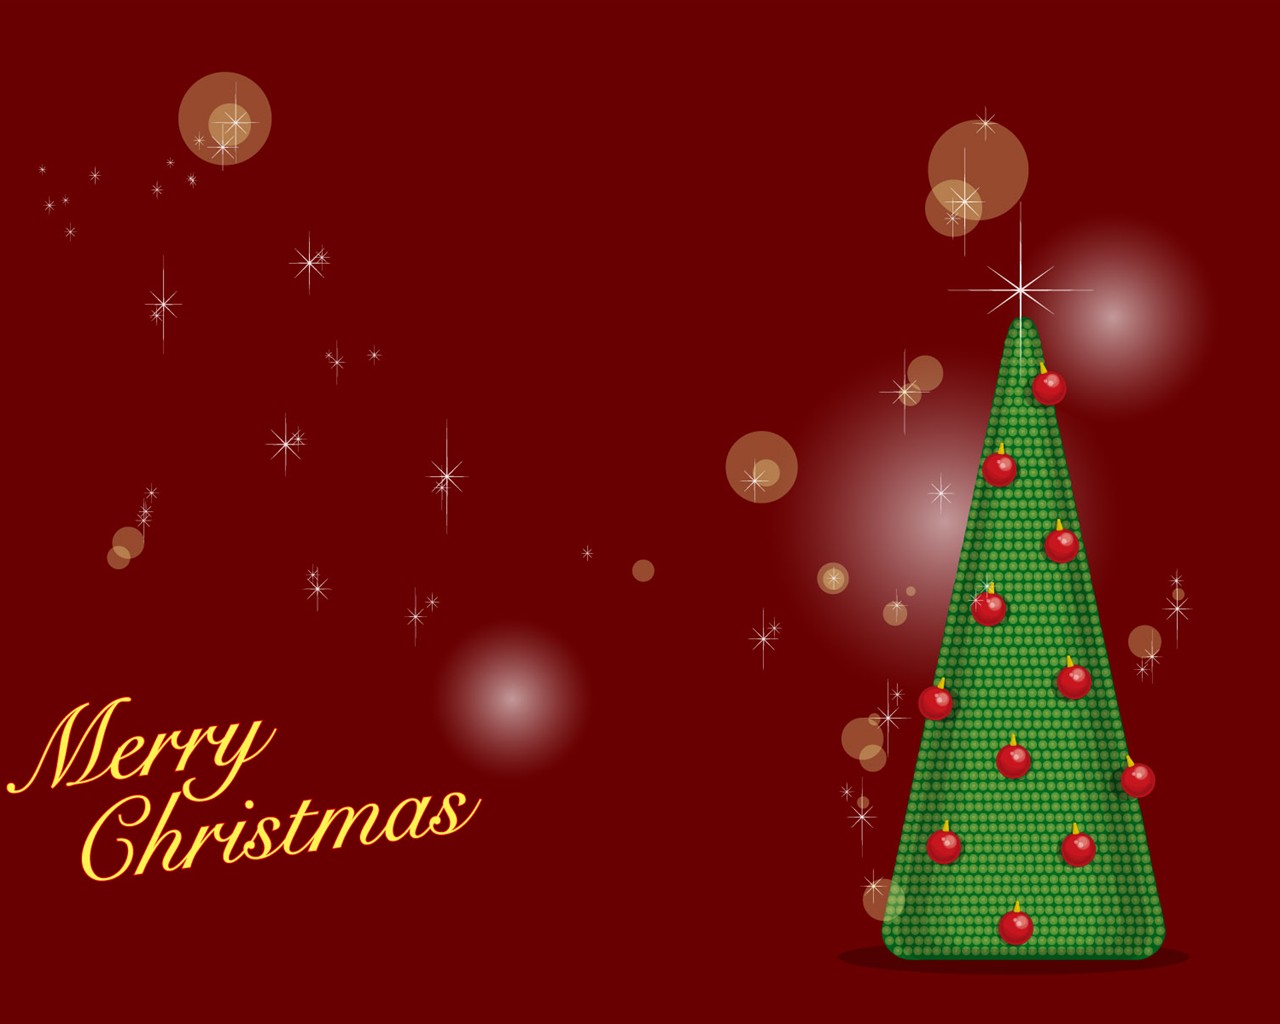 Exquisite Christmas Theme HD Wallpapers #21 - 1280x1024